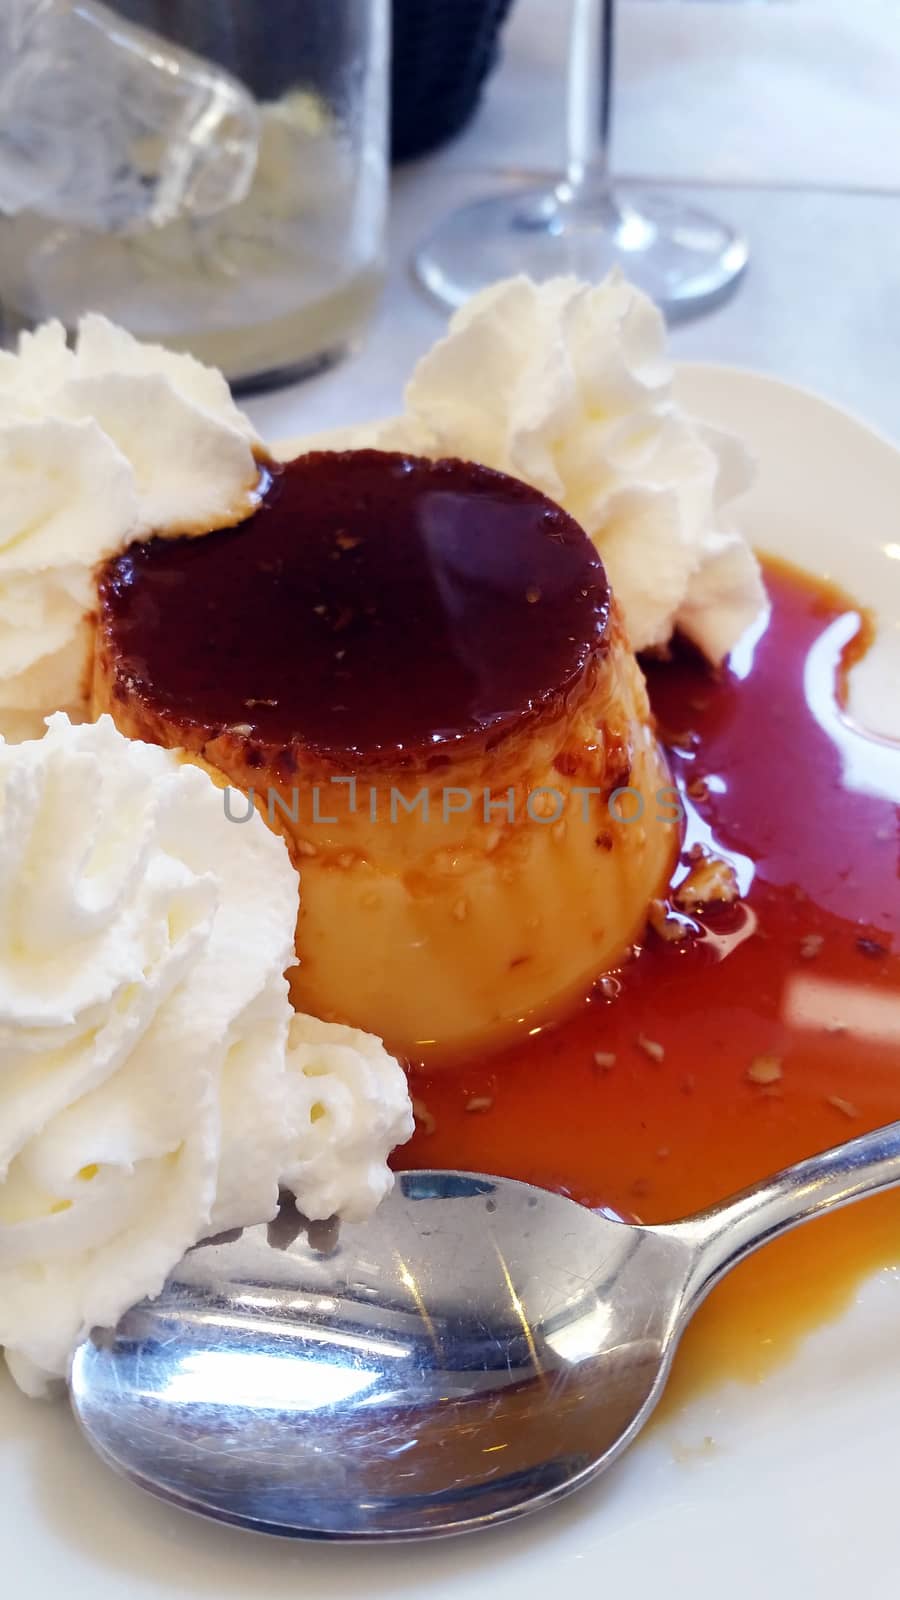 Delicious creme caramel dessert in a French restaurant